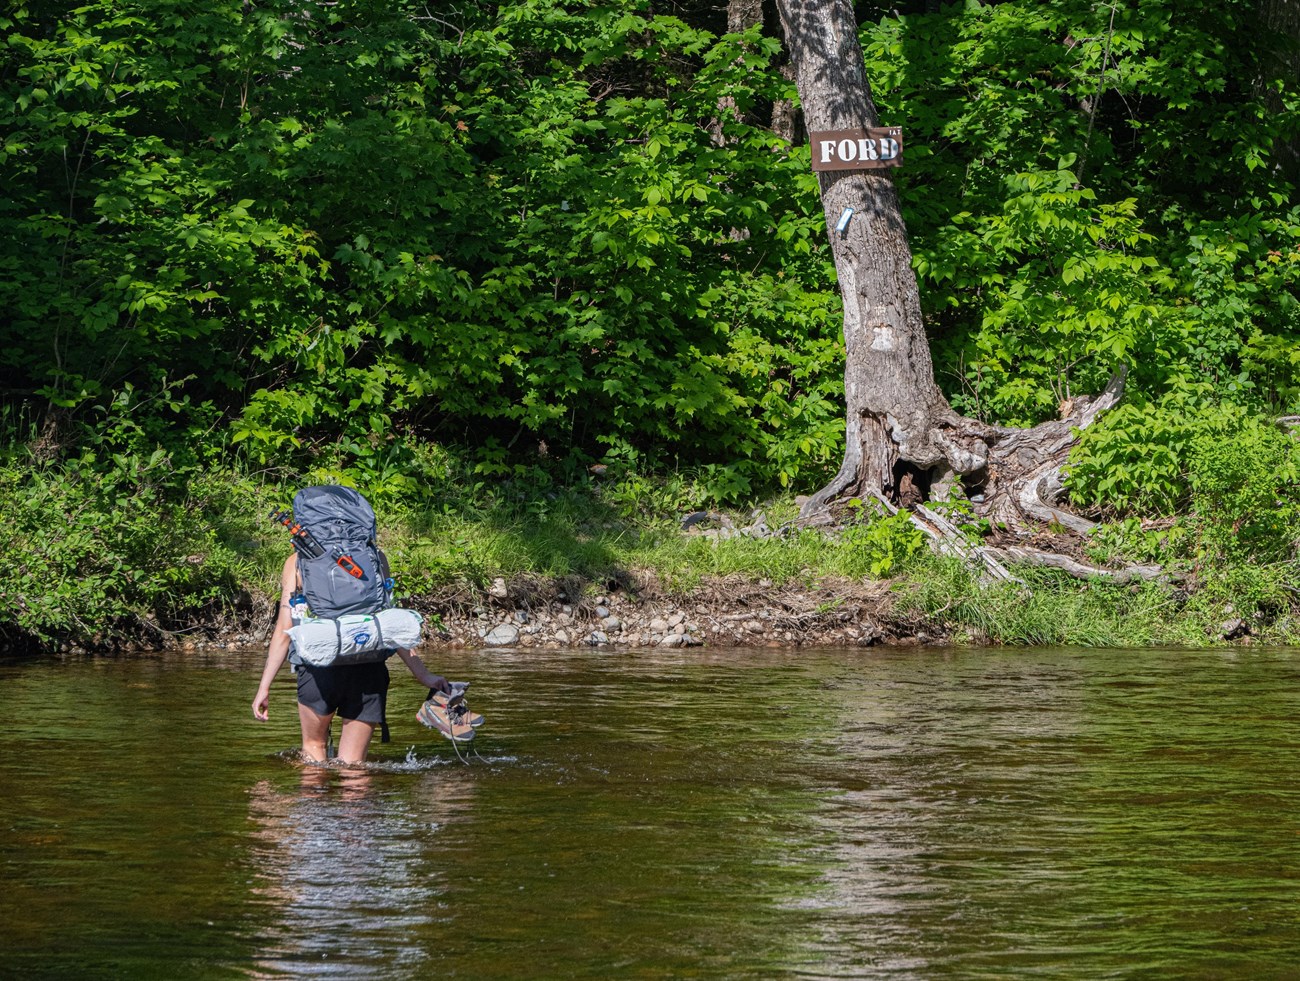 A hiker wearing a large backpack and carrying hiking boots crosses a stream with thigh-deep water towards the opposite shore.